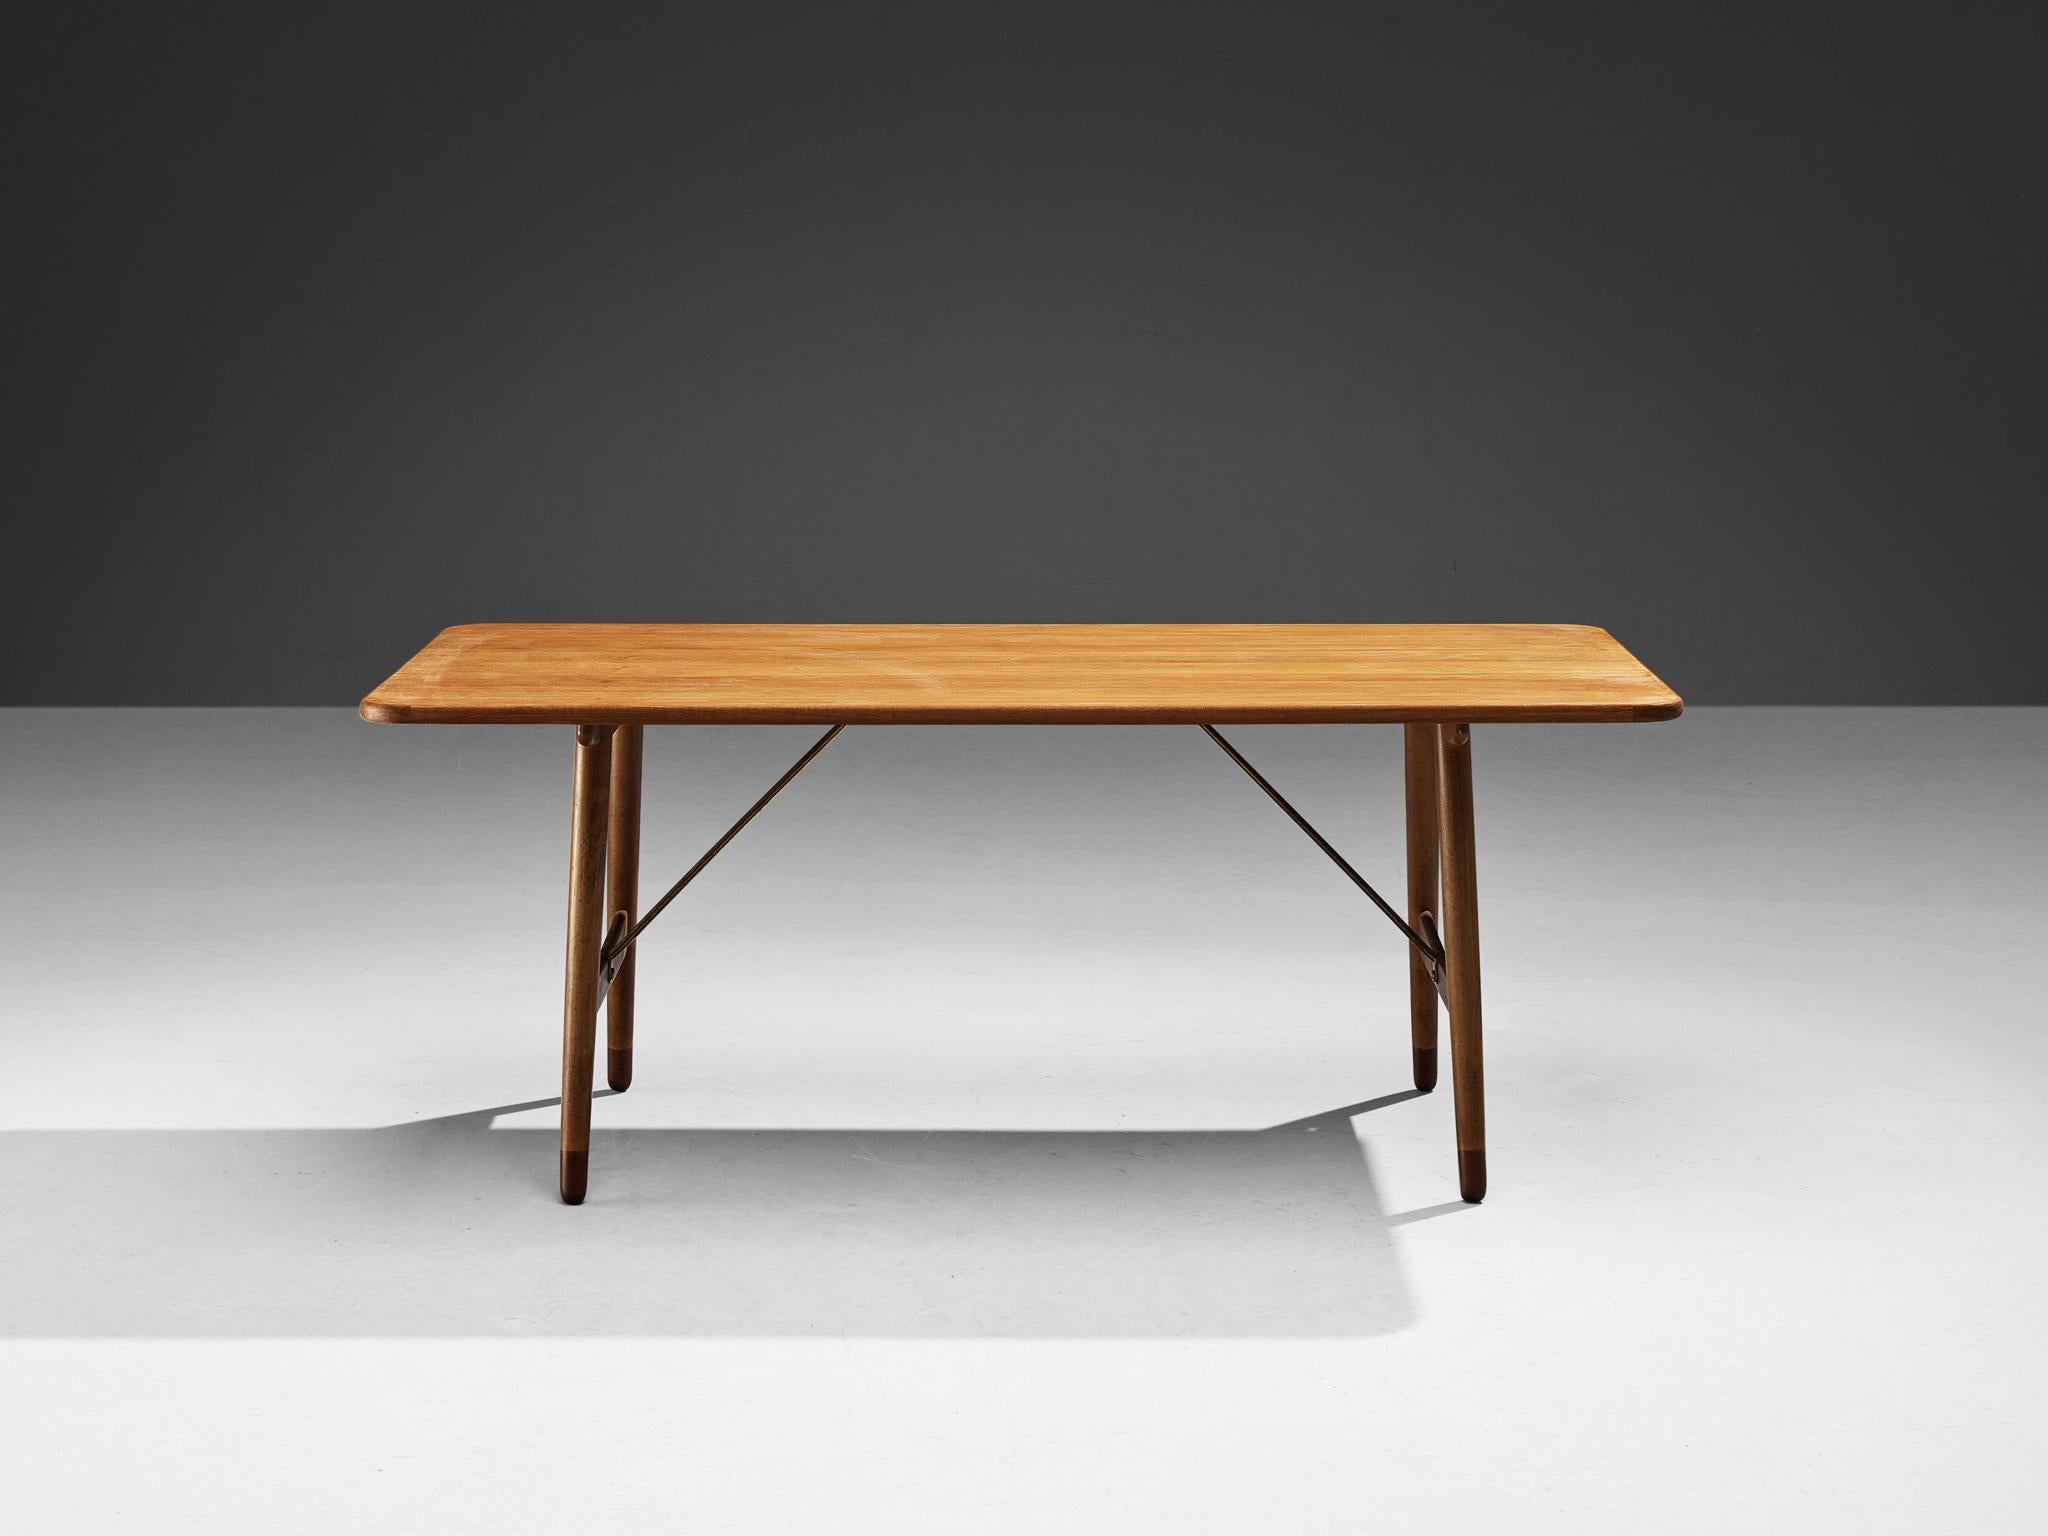 Børge Mogensen for Frederica Stolefabrik, hunting table, oak, teak, brass Denmark, circa 1960. 

This table with a teak top and oak frame is designed by Børge Mogensen. The table, nicknamed the Hunting table, is originally designed by Mogensen for